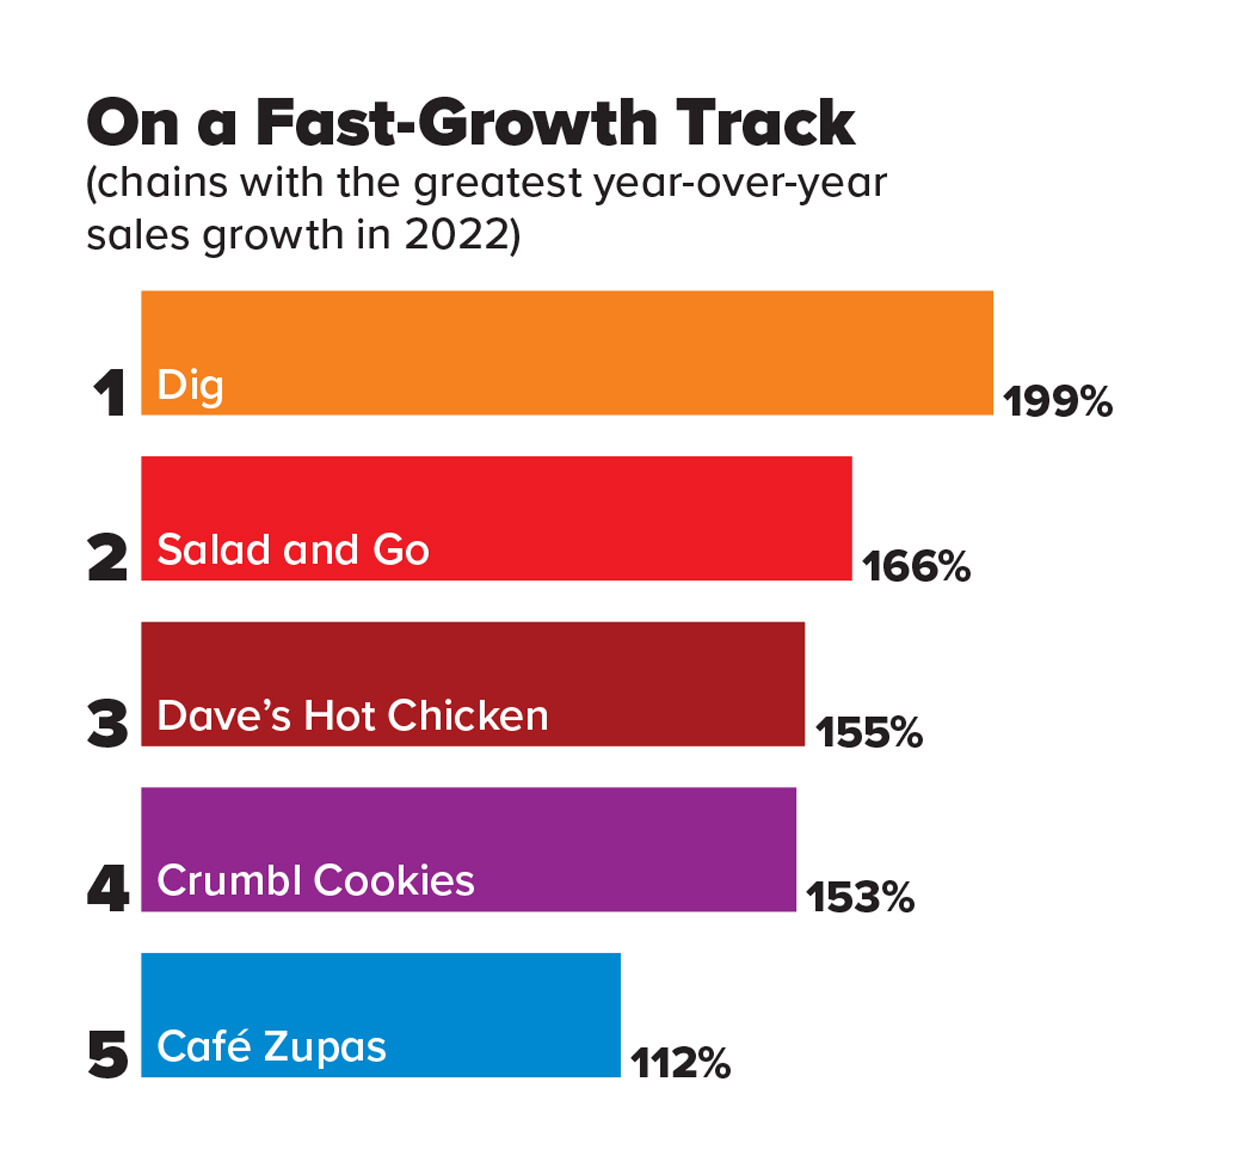 On a Fast-Growth Track (chains with the greatest year-over-year sales growth in 2022)